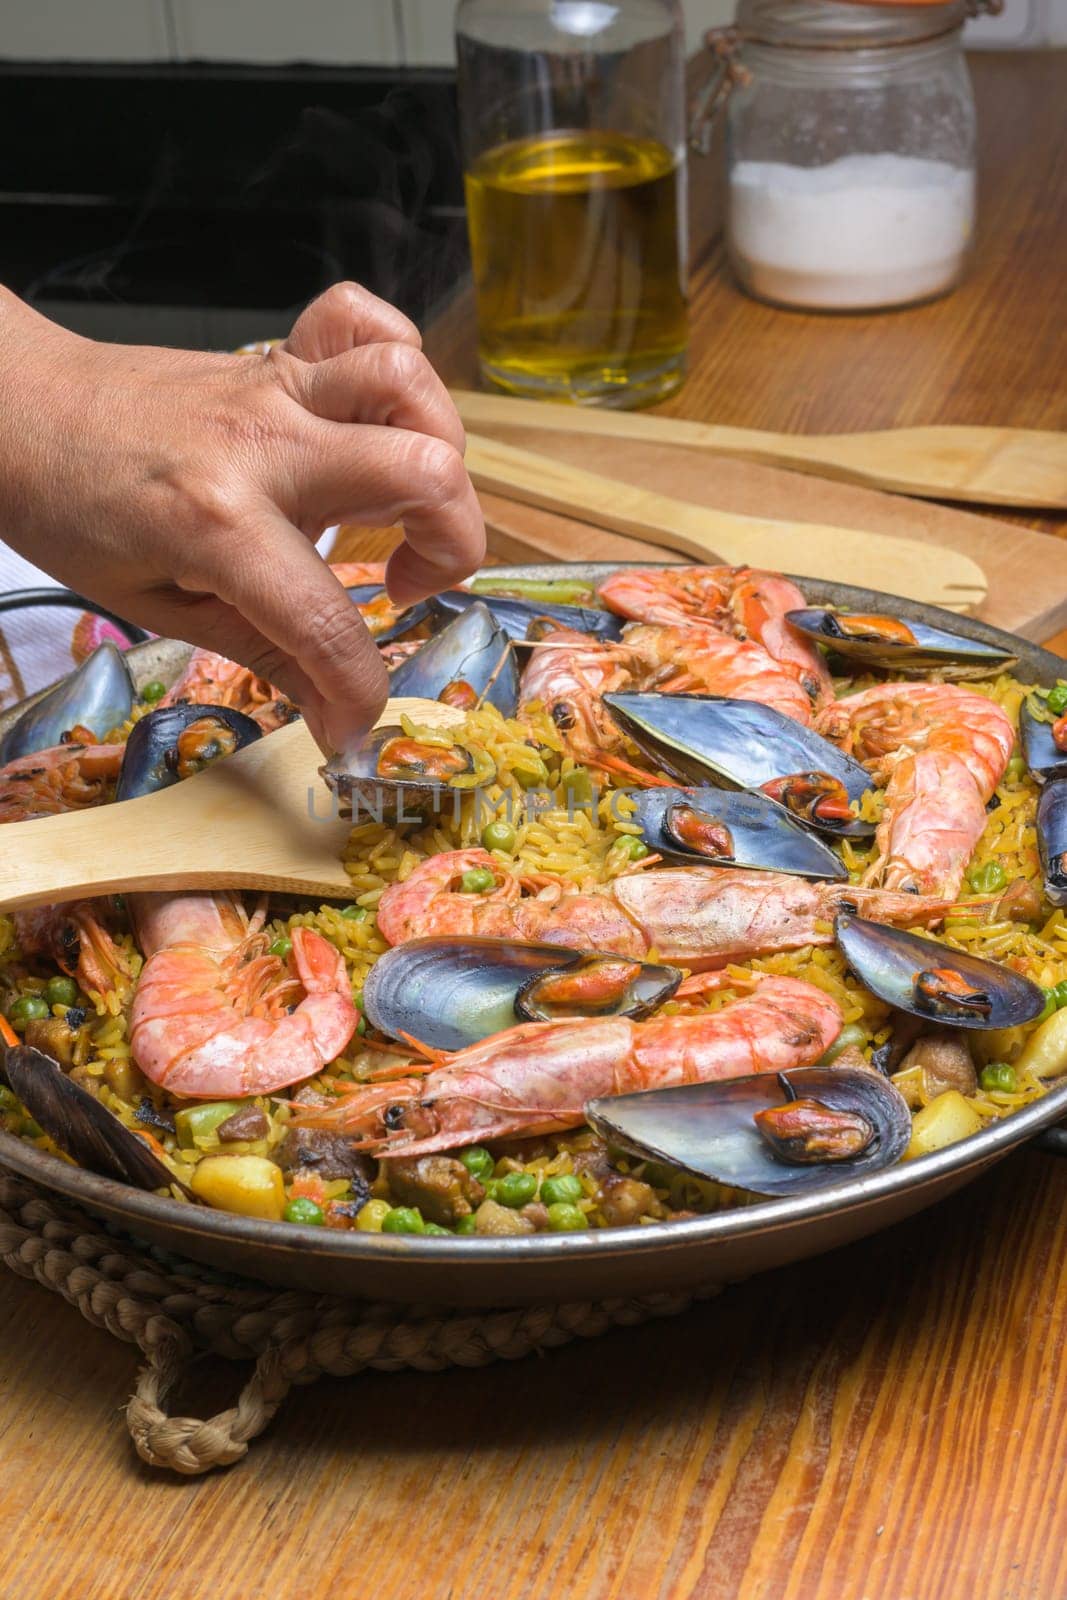 Hand gently stirring a seafood paella with shrimp and mussels using a wooden spatula, typical Spanish cuisine, Majorca, Balearic Islands, Spain by carlosviv